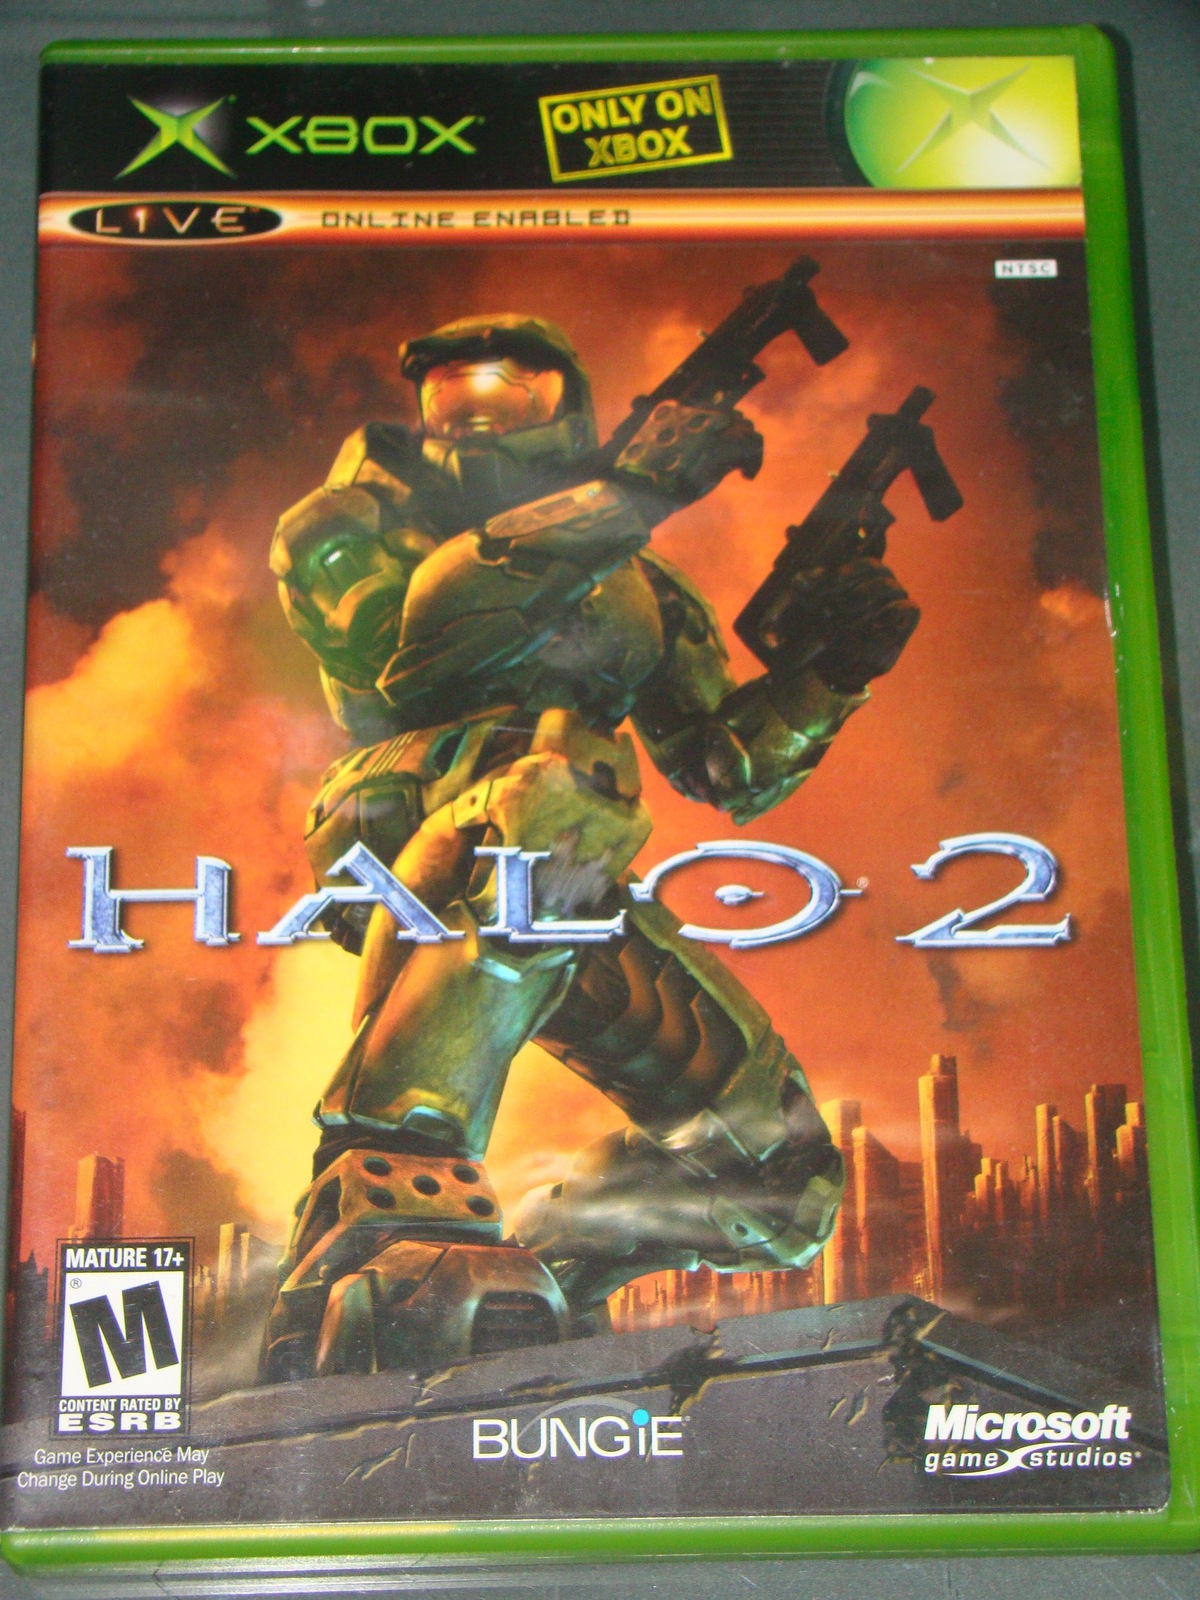 XBOX - HALO 2 (Complete with Manual) - Video Games